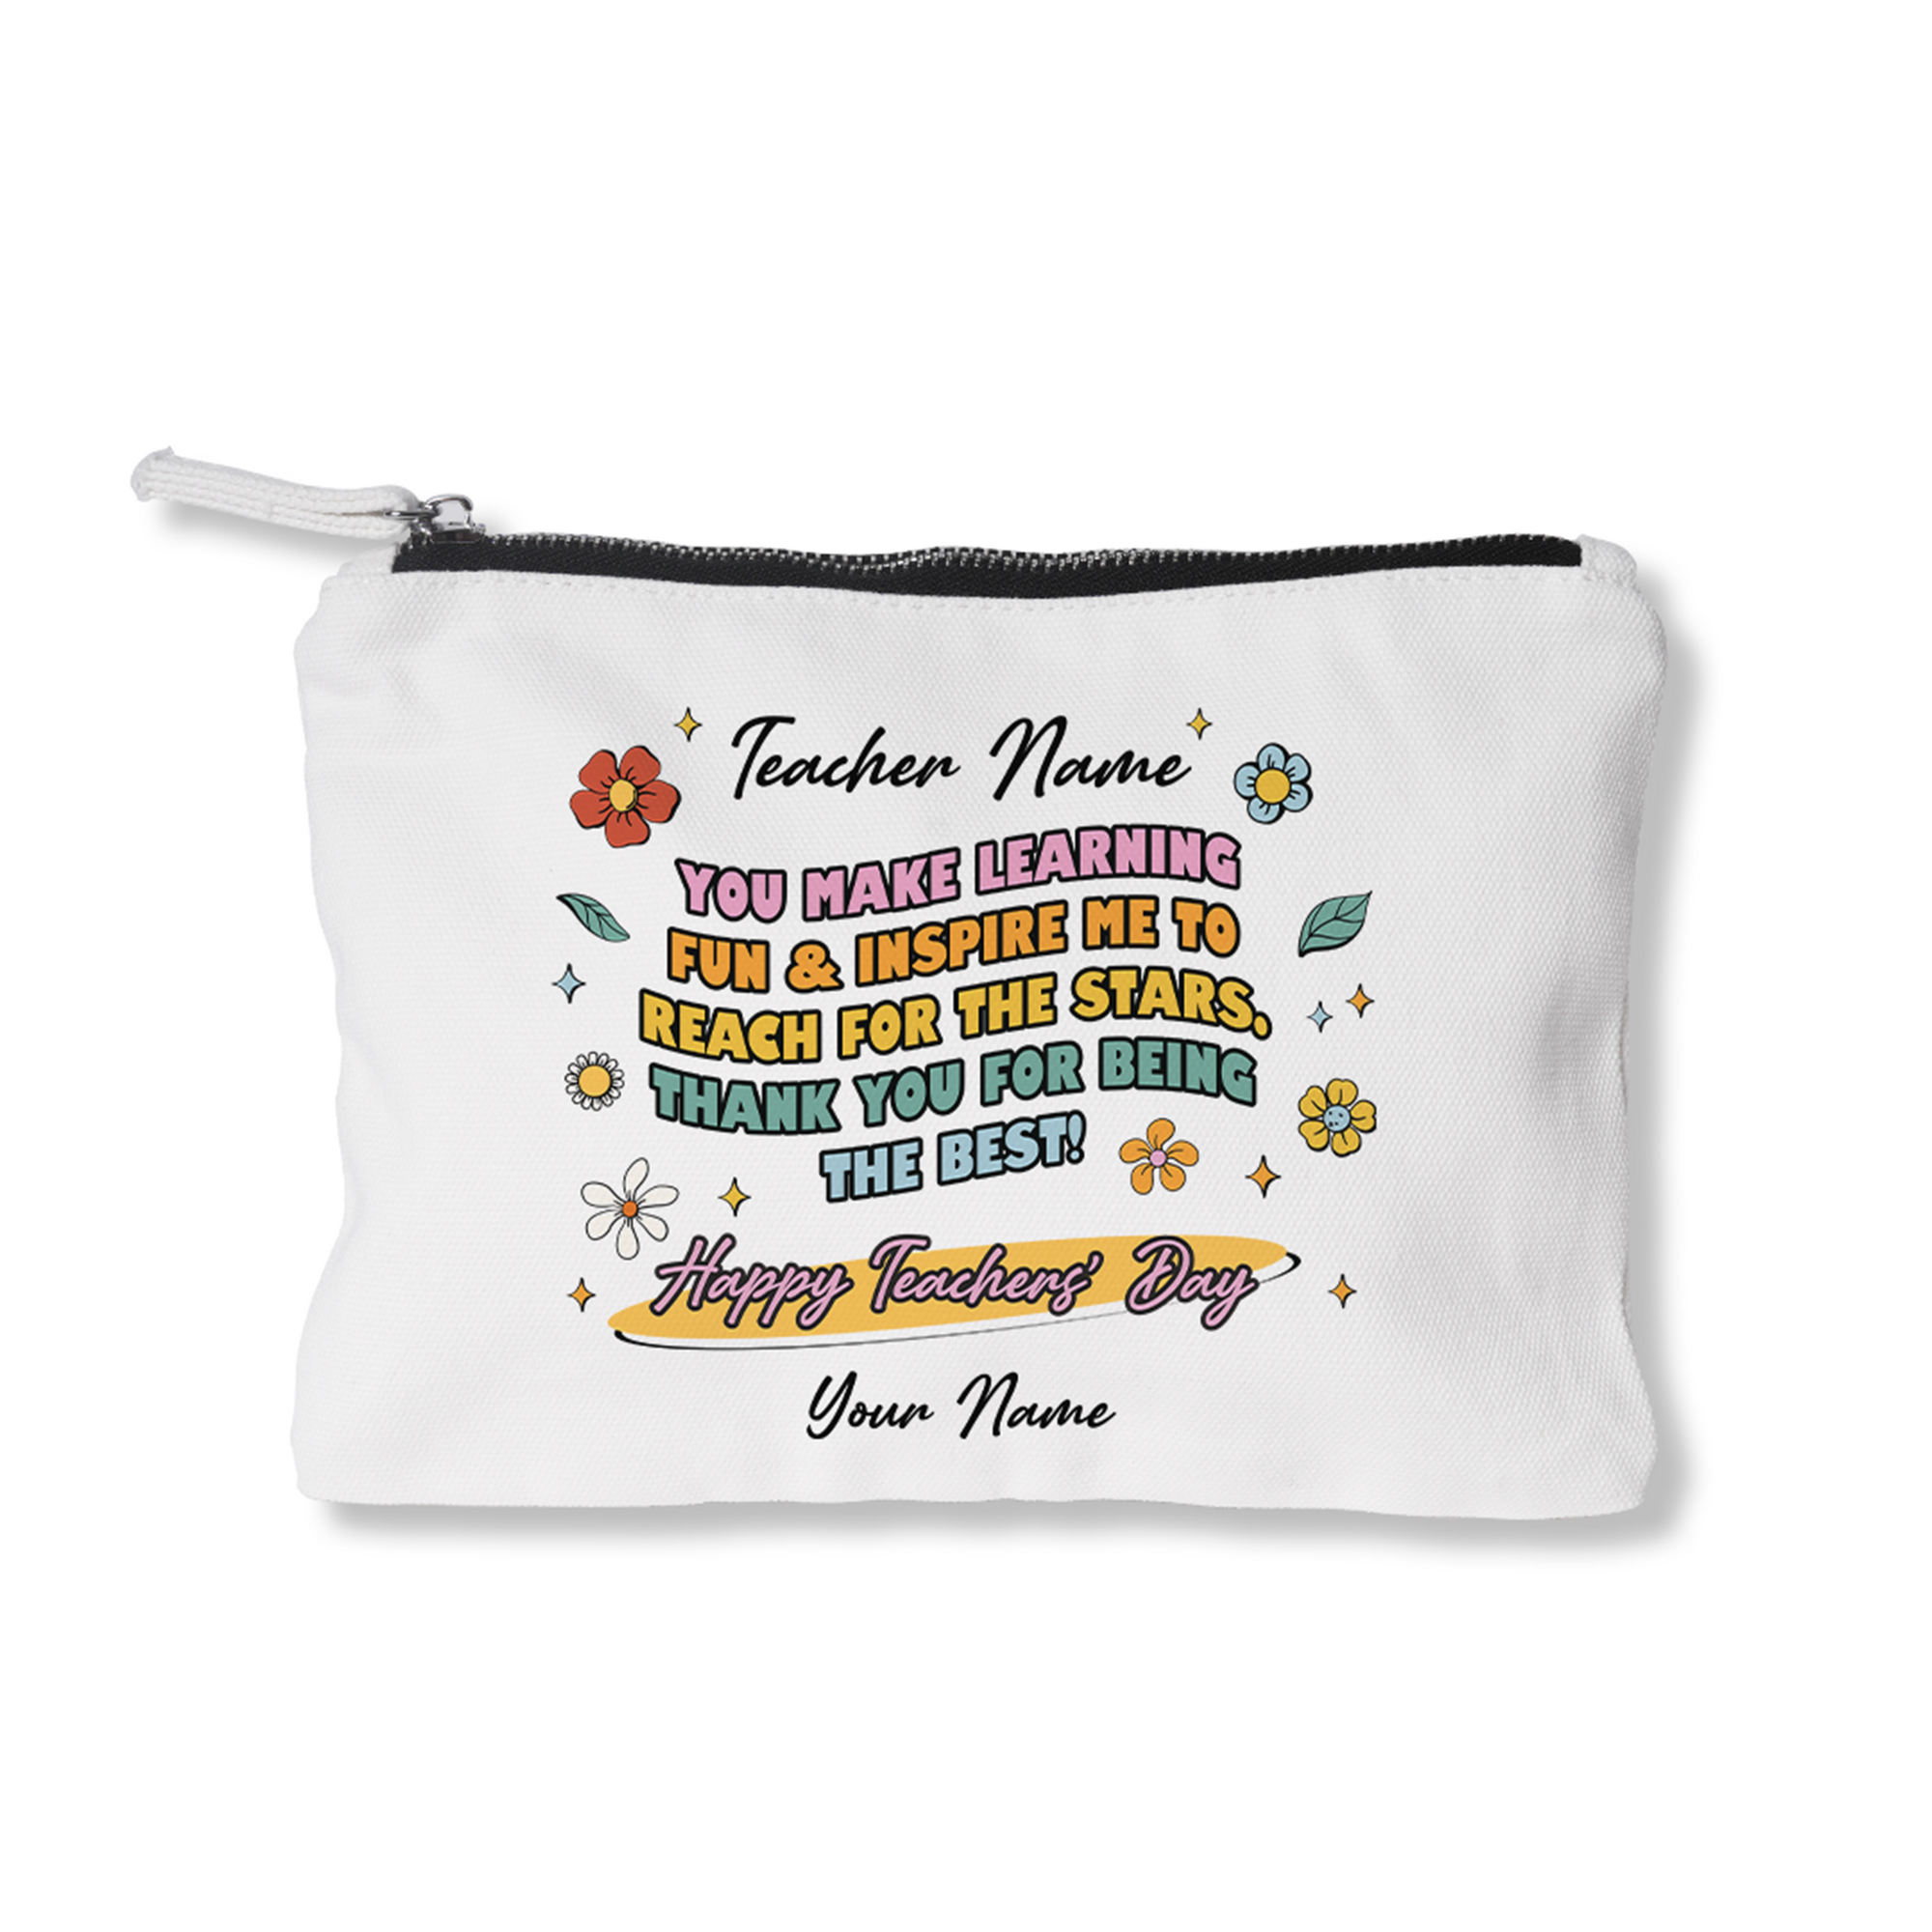 Reach for The Stars Quote Zipper Pouch